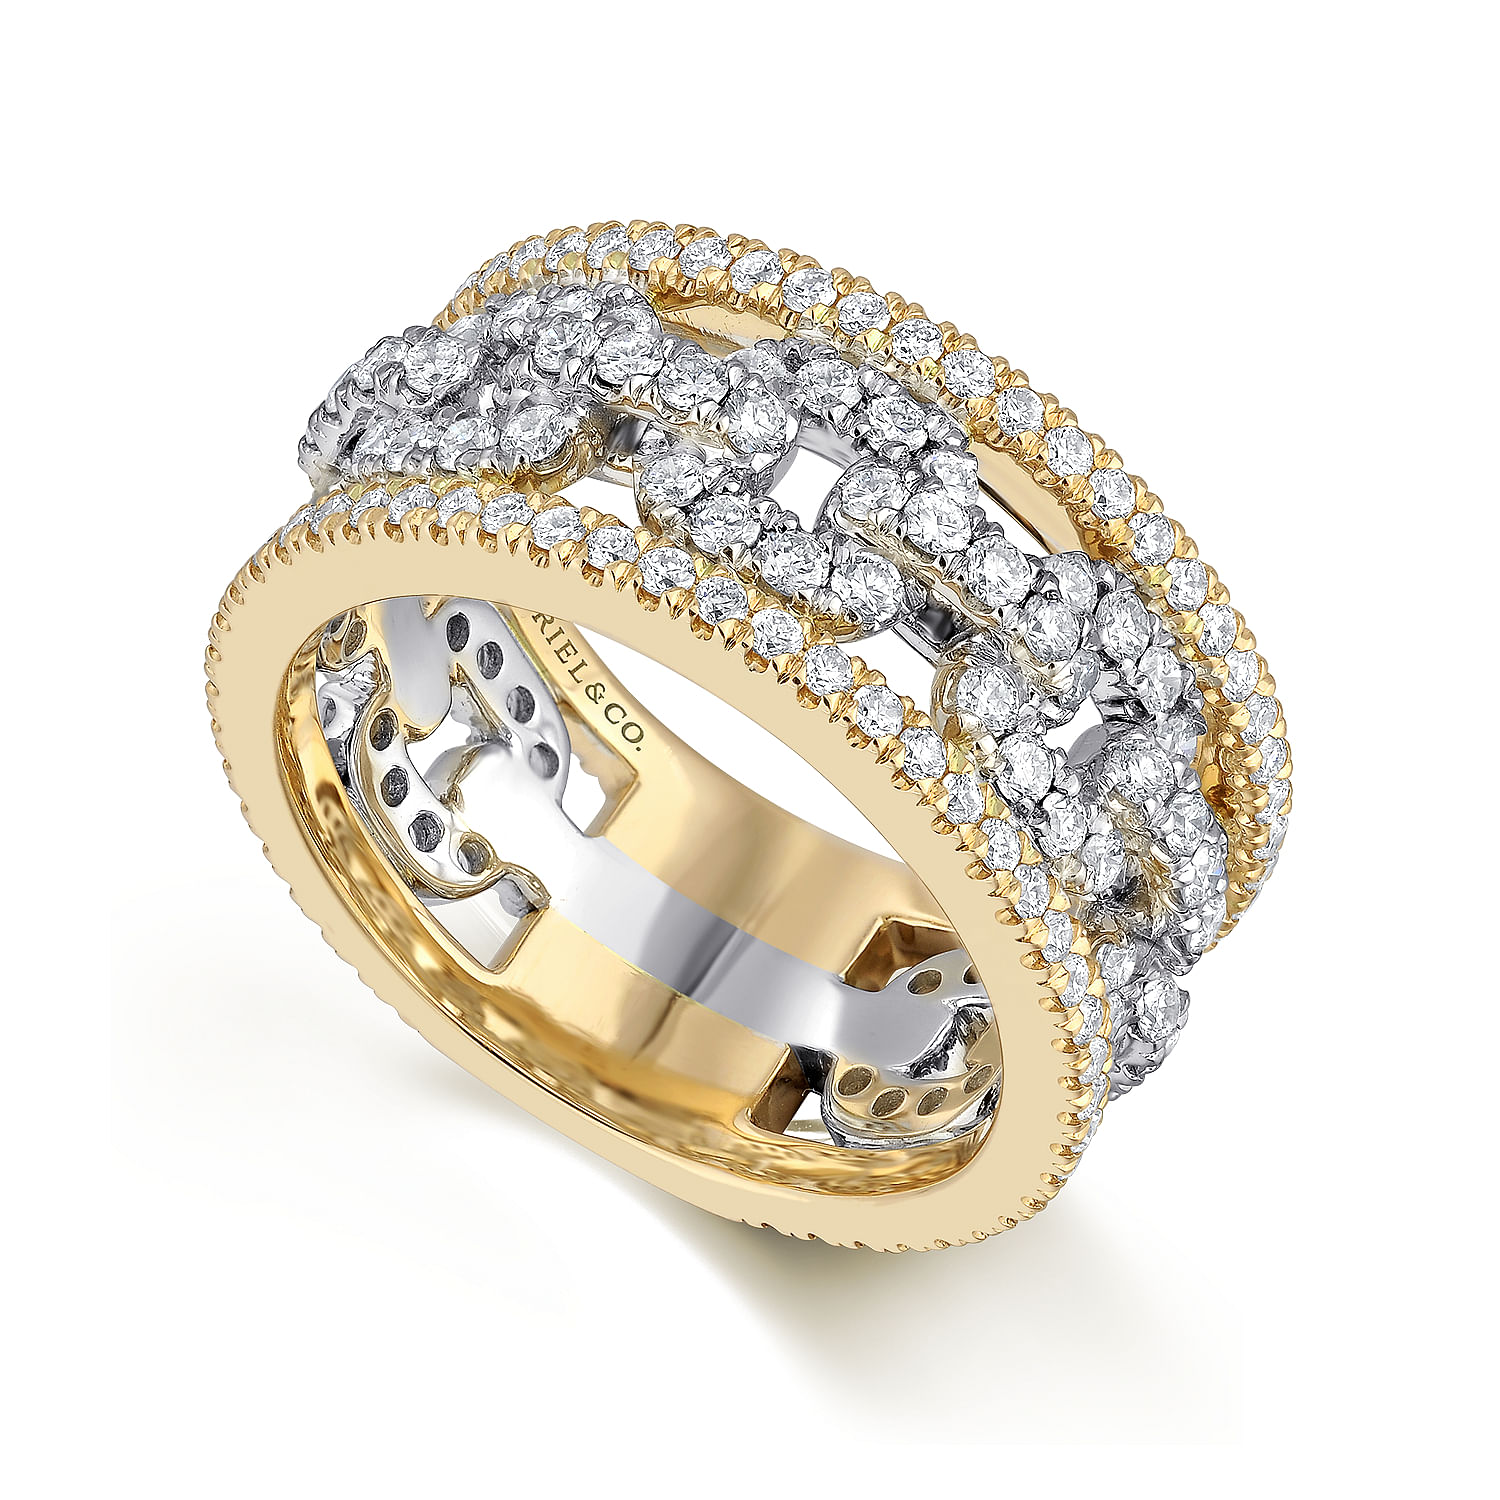 Wide 14K White and Yellow Gold Fancy Diamond Anniversary Band